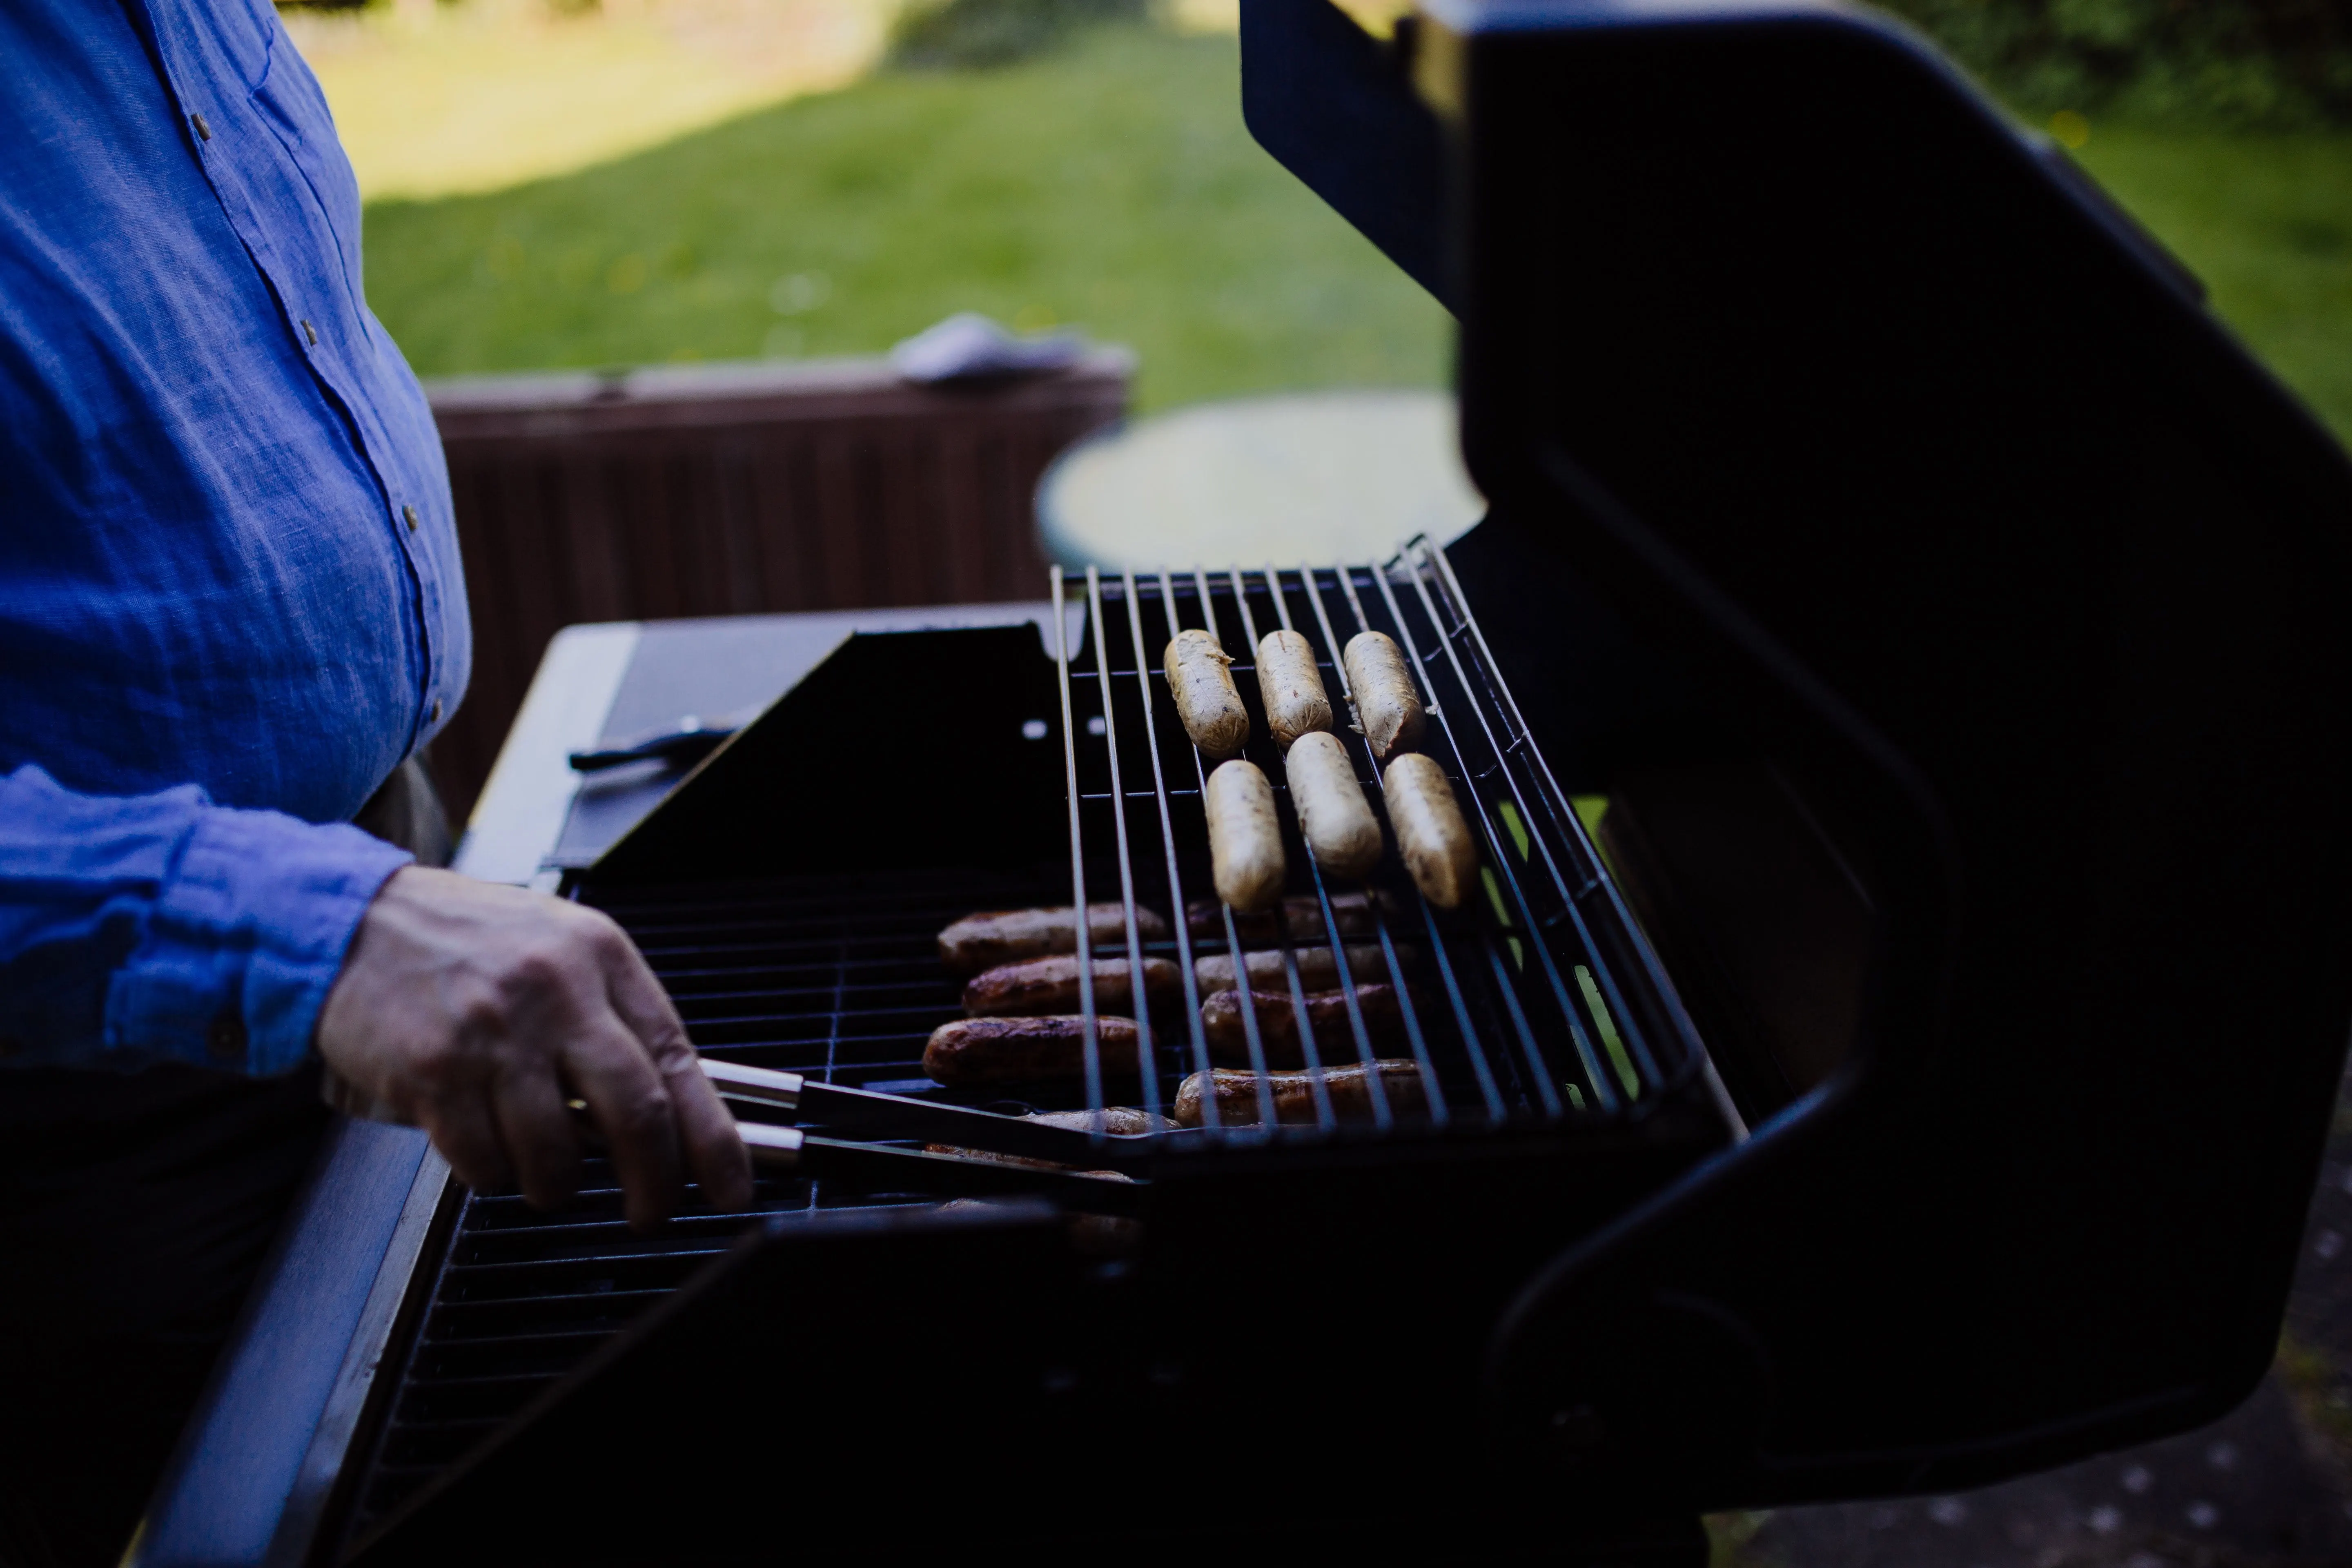 How Is The Barbecue Oven Cleaned And Maintained Before, During And After Use?